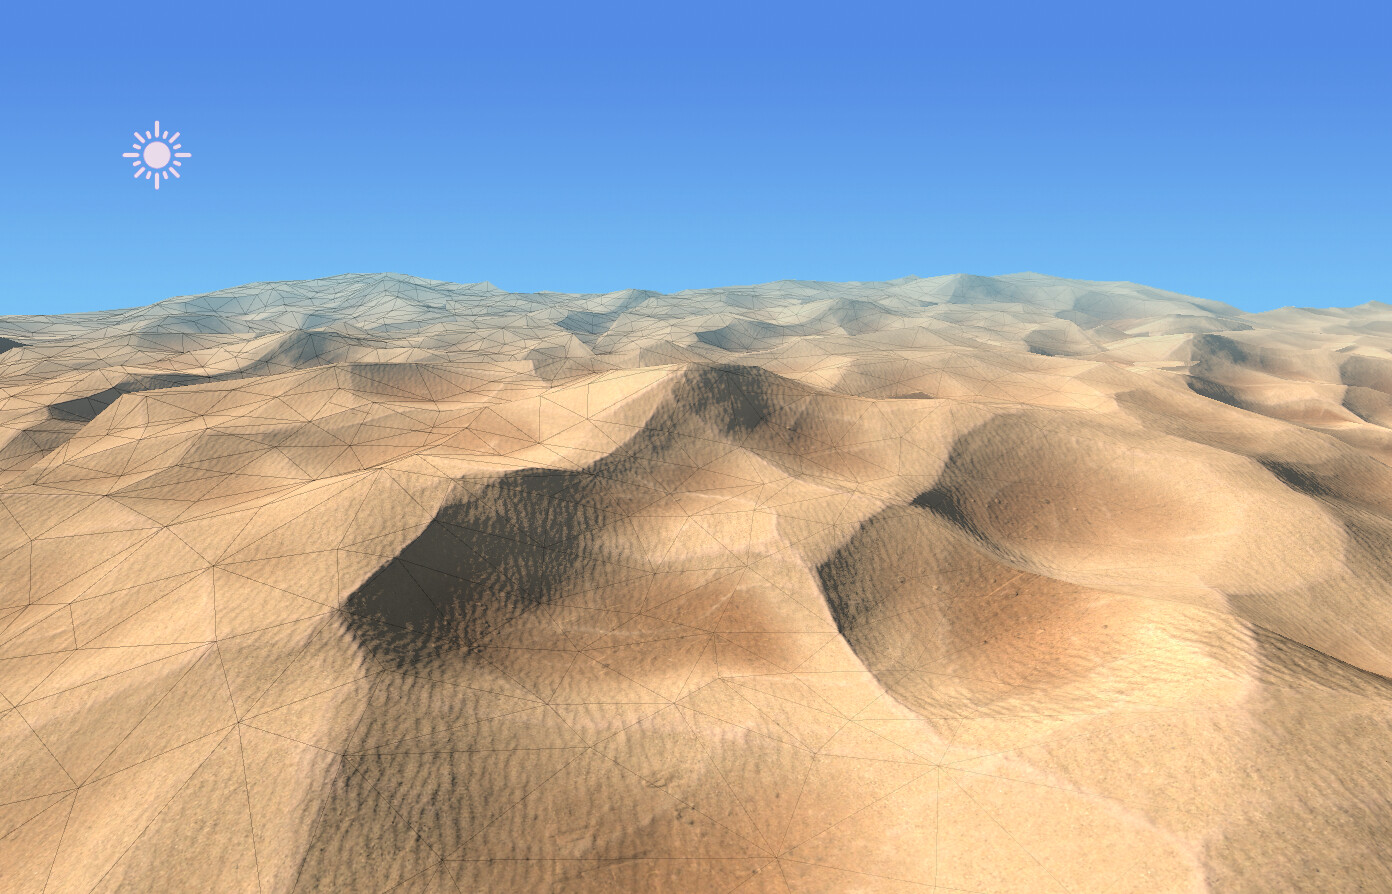 This final shot was just a quick screen grab from inside unity. I made a really low poly tile-able decimated mesh of the terrain that I then applied the PBR material to. You could make a pretty epic (cheap) terrain set using this method.